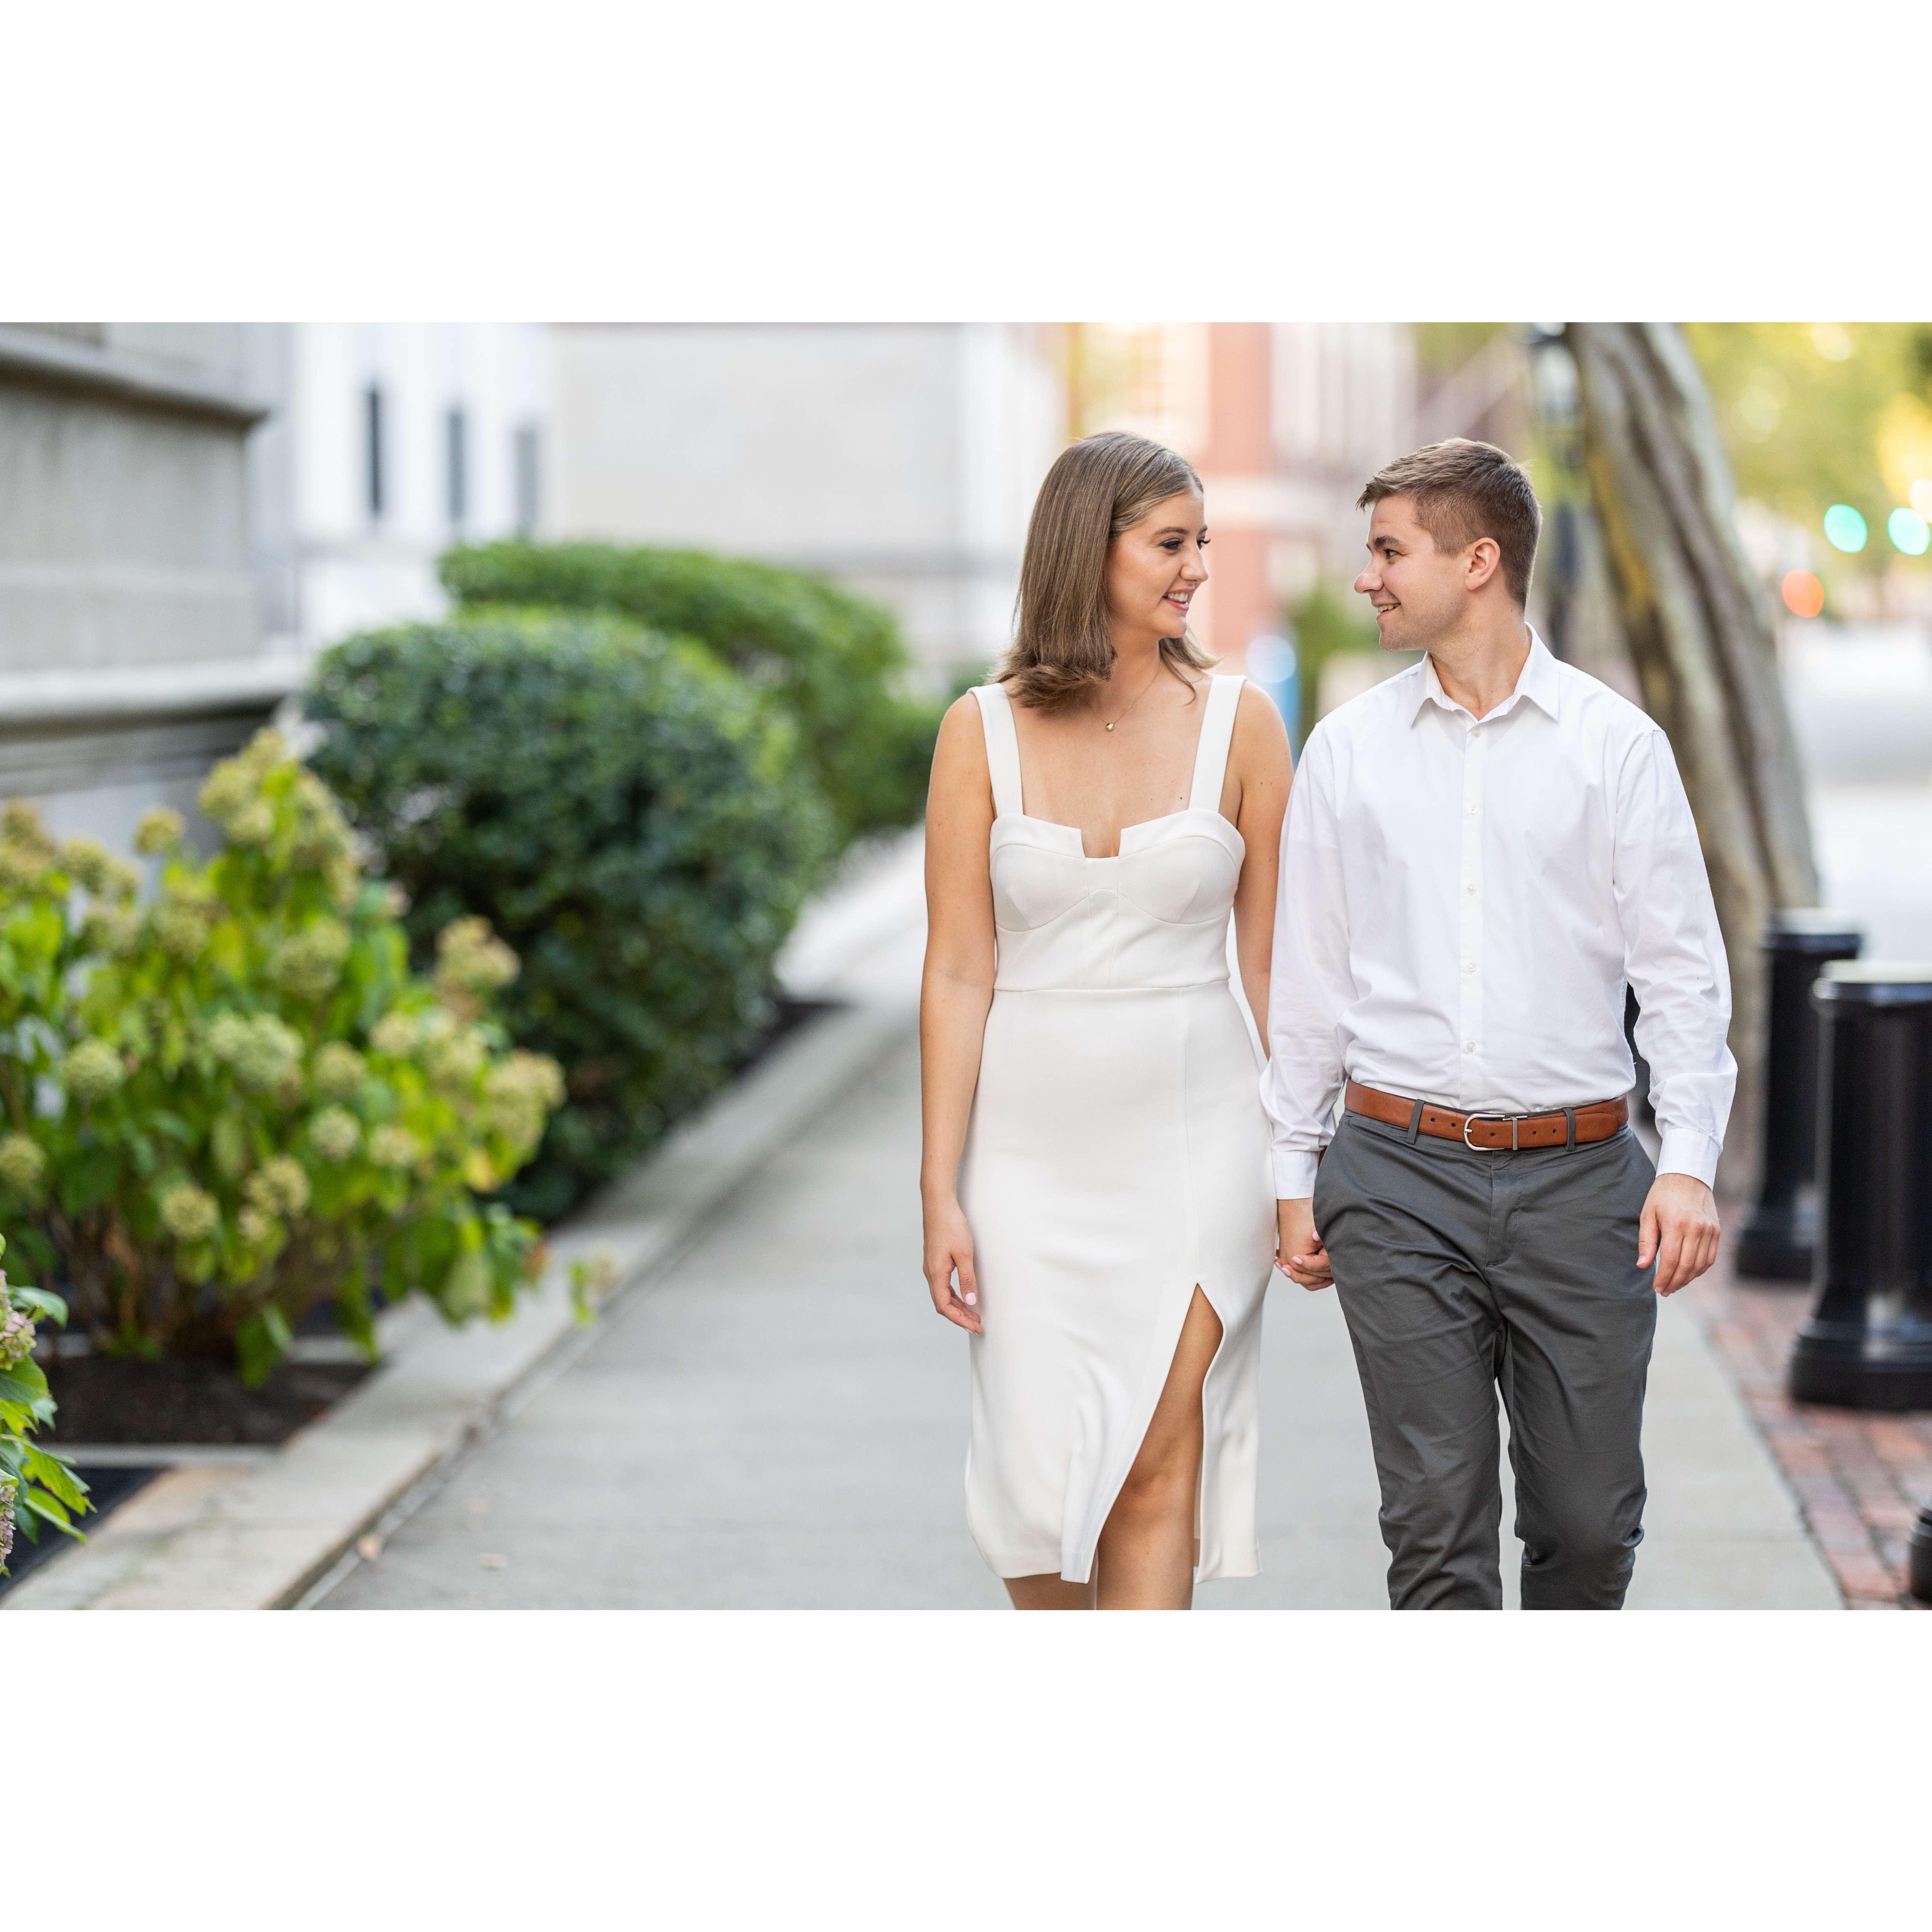 Our engagement session in downtown Providence!